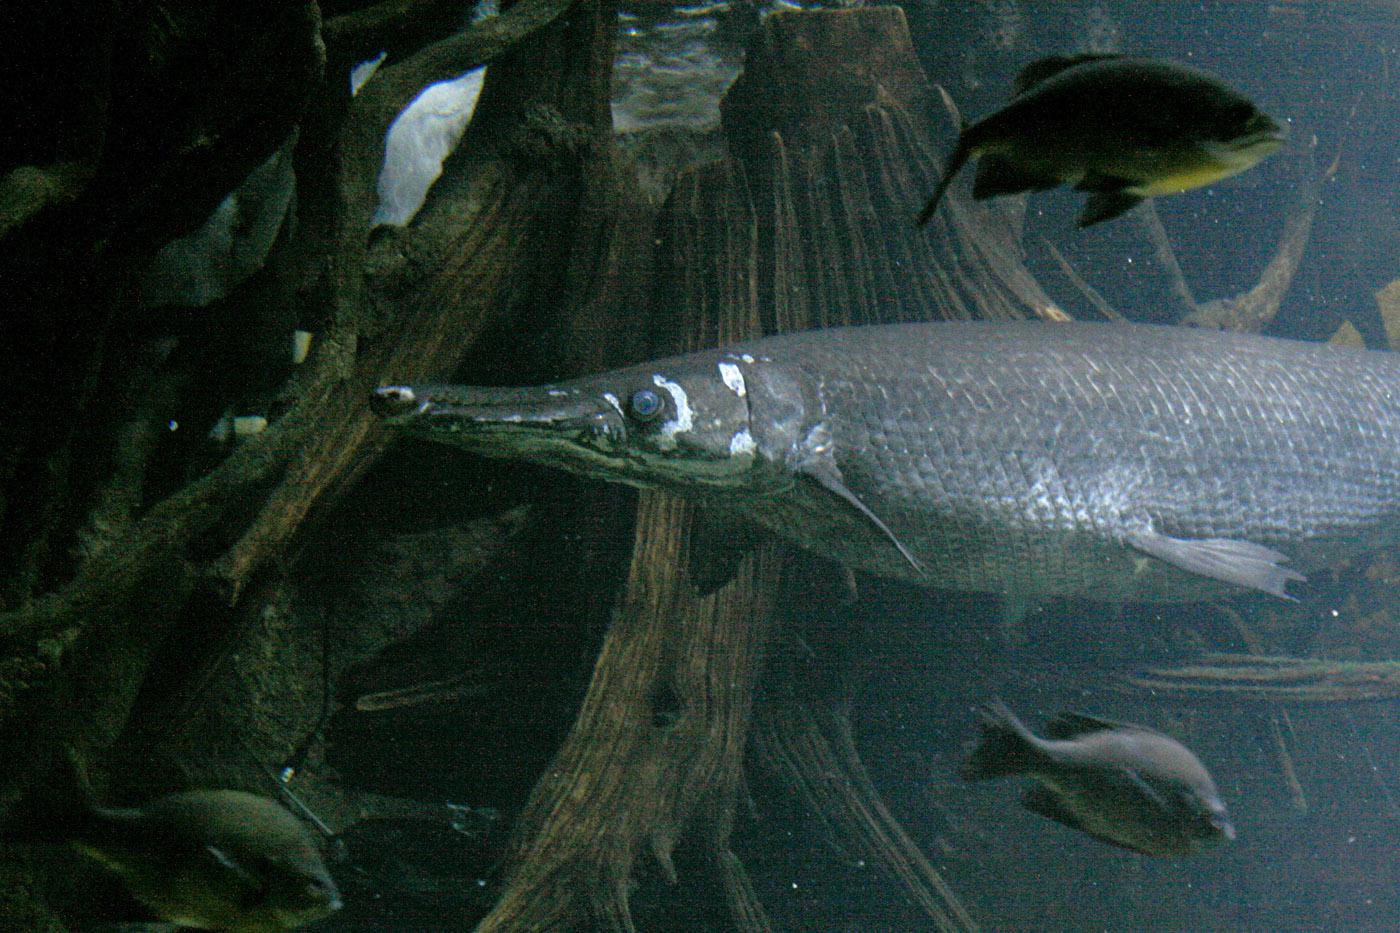 The alligator gar is one of the largest freshwater fish in North America. It gets its name from the alligator-like appearance of teeth along its elongated snout. (Photo by Alyssa Card)